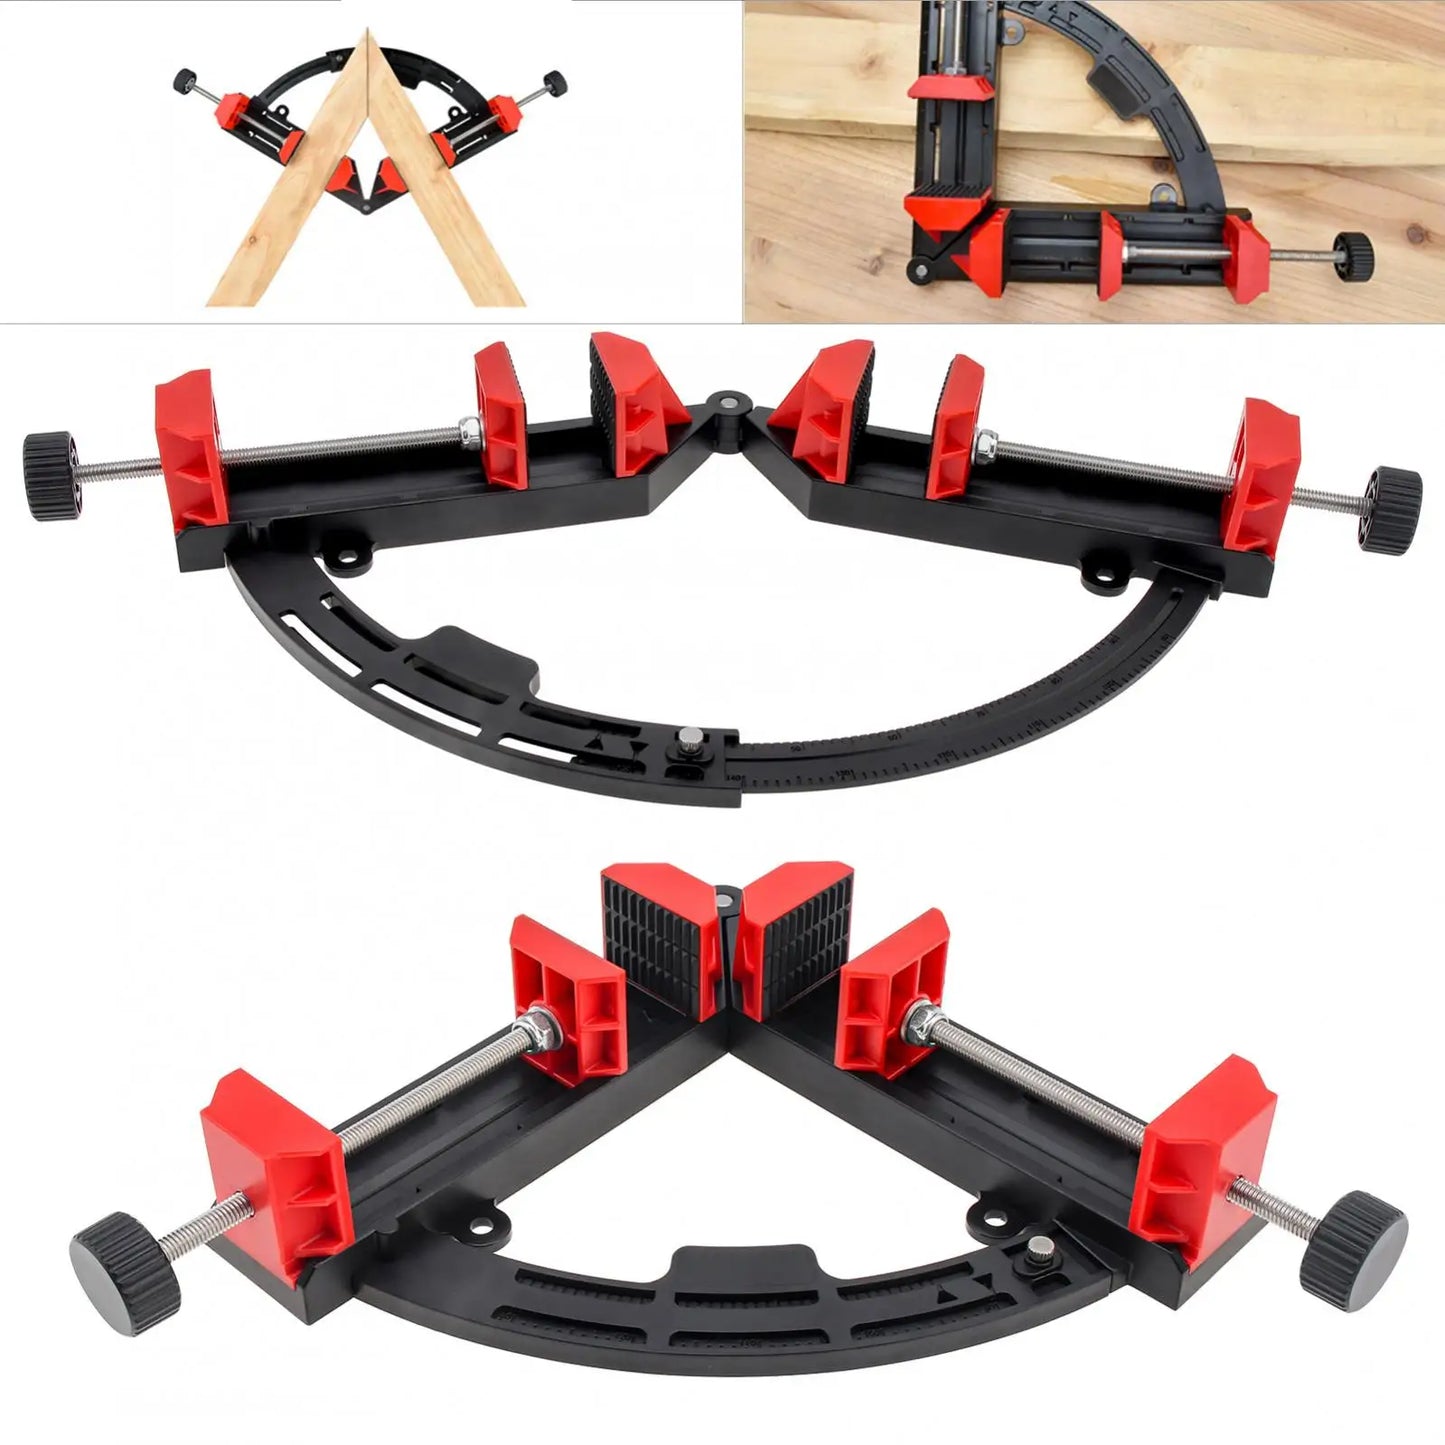 Multi-Angle Adjustable Corner Clamp for Woodworking